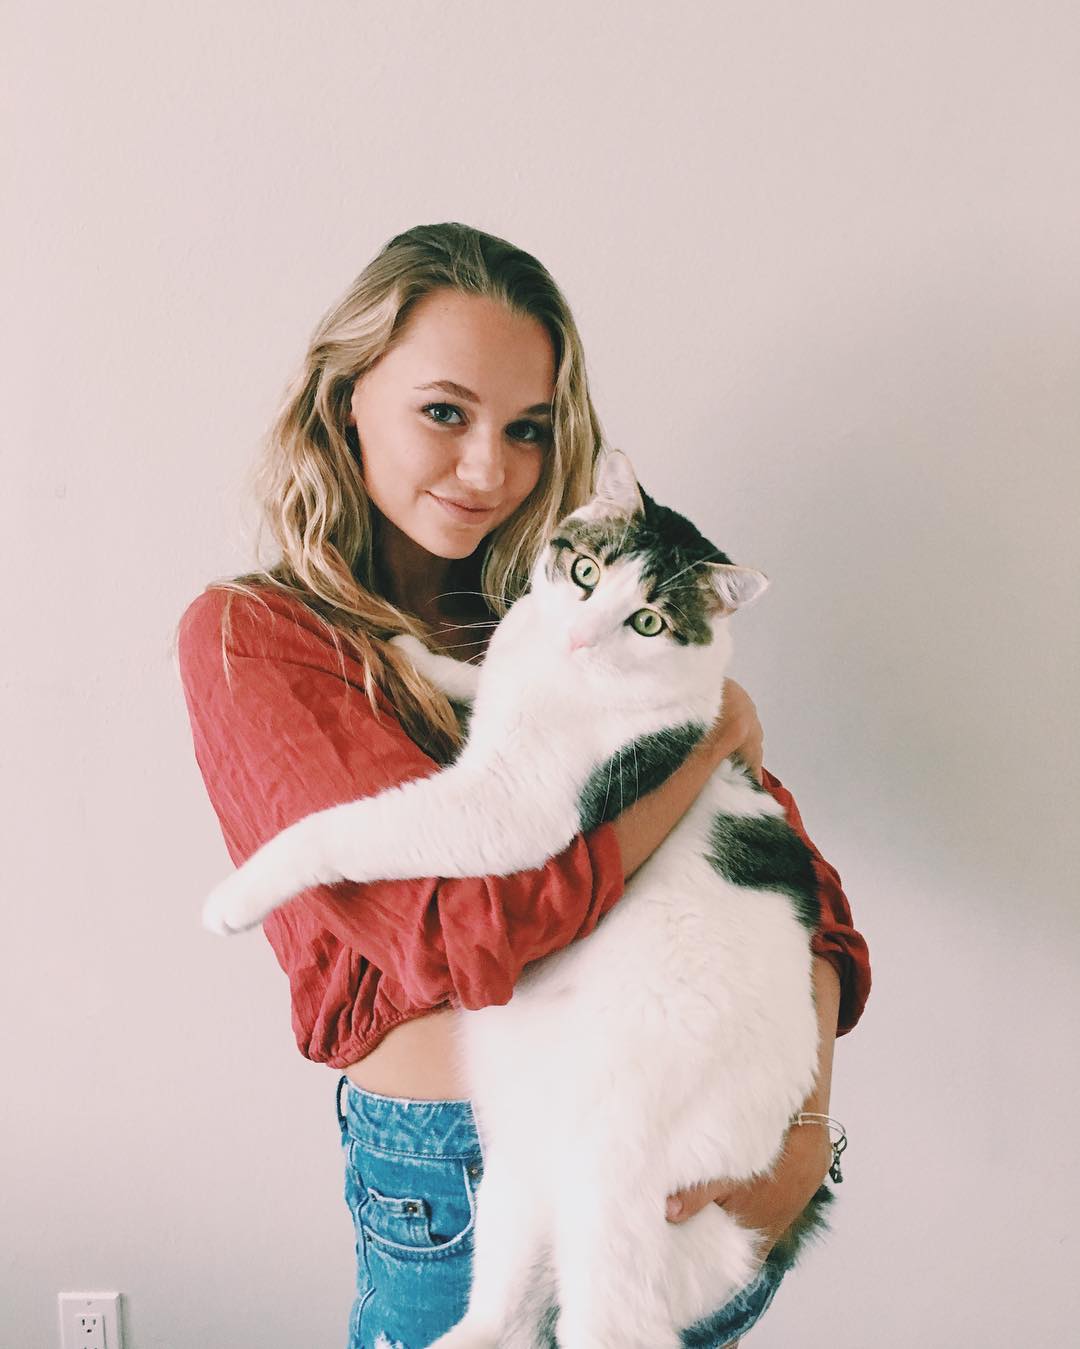 44 Hot And Sexy Pictures Of Madison Iseman Will Get You Hot Under Your Collars | Best Of Comic Books